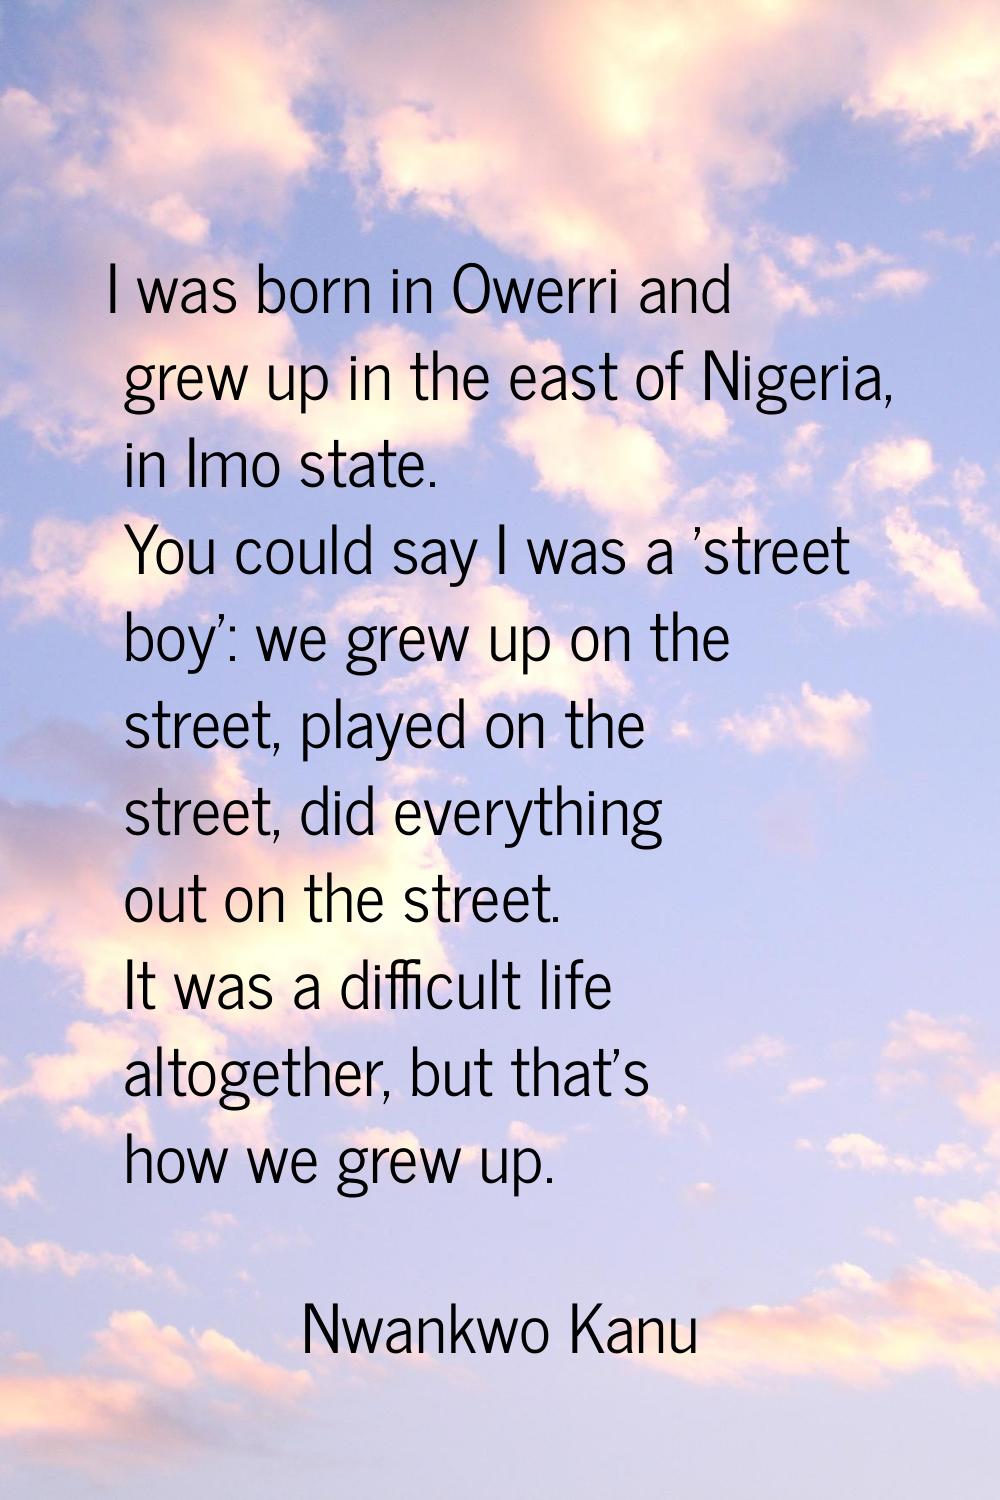 I was born in Owerri and grew up in the east of Nigeria, in Imo state. You could say I was a 'stree